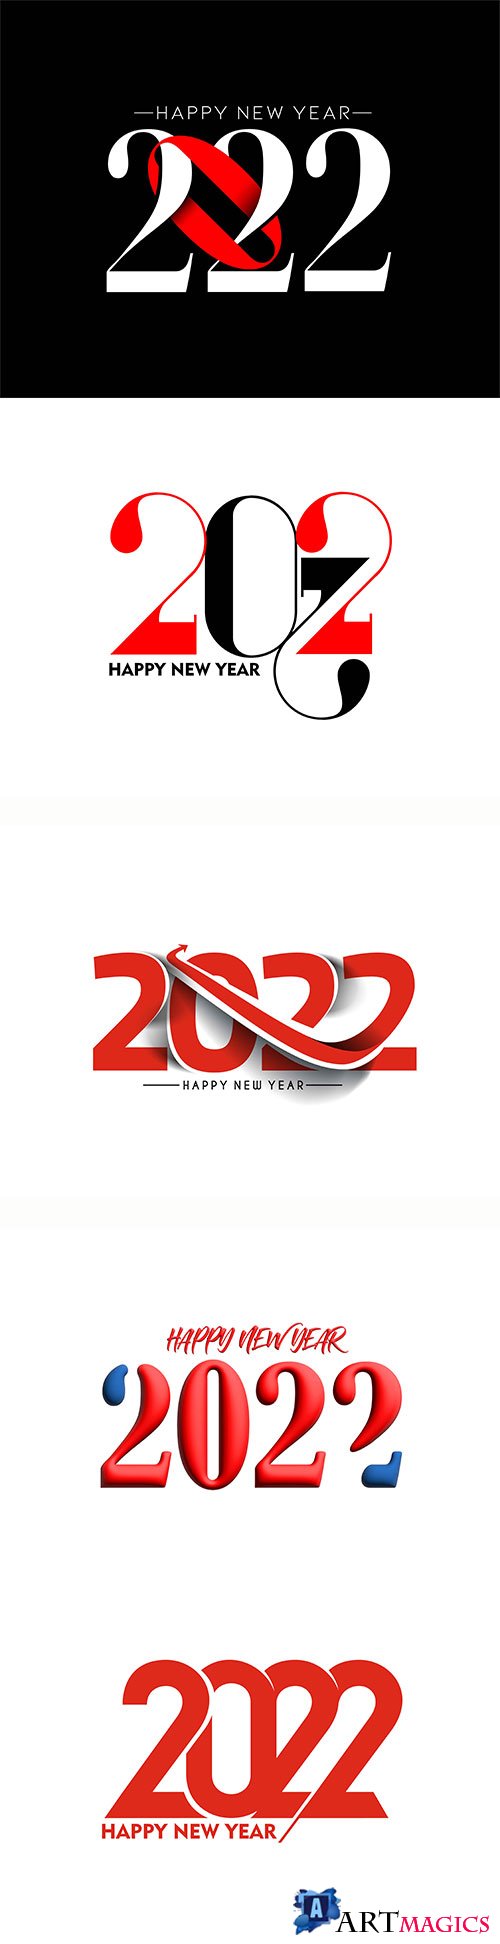 Happy new year 2022 text typography design vector illustration